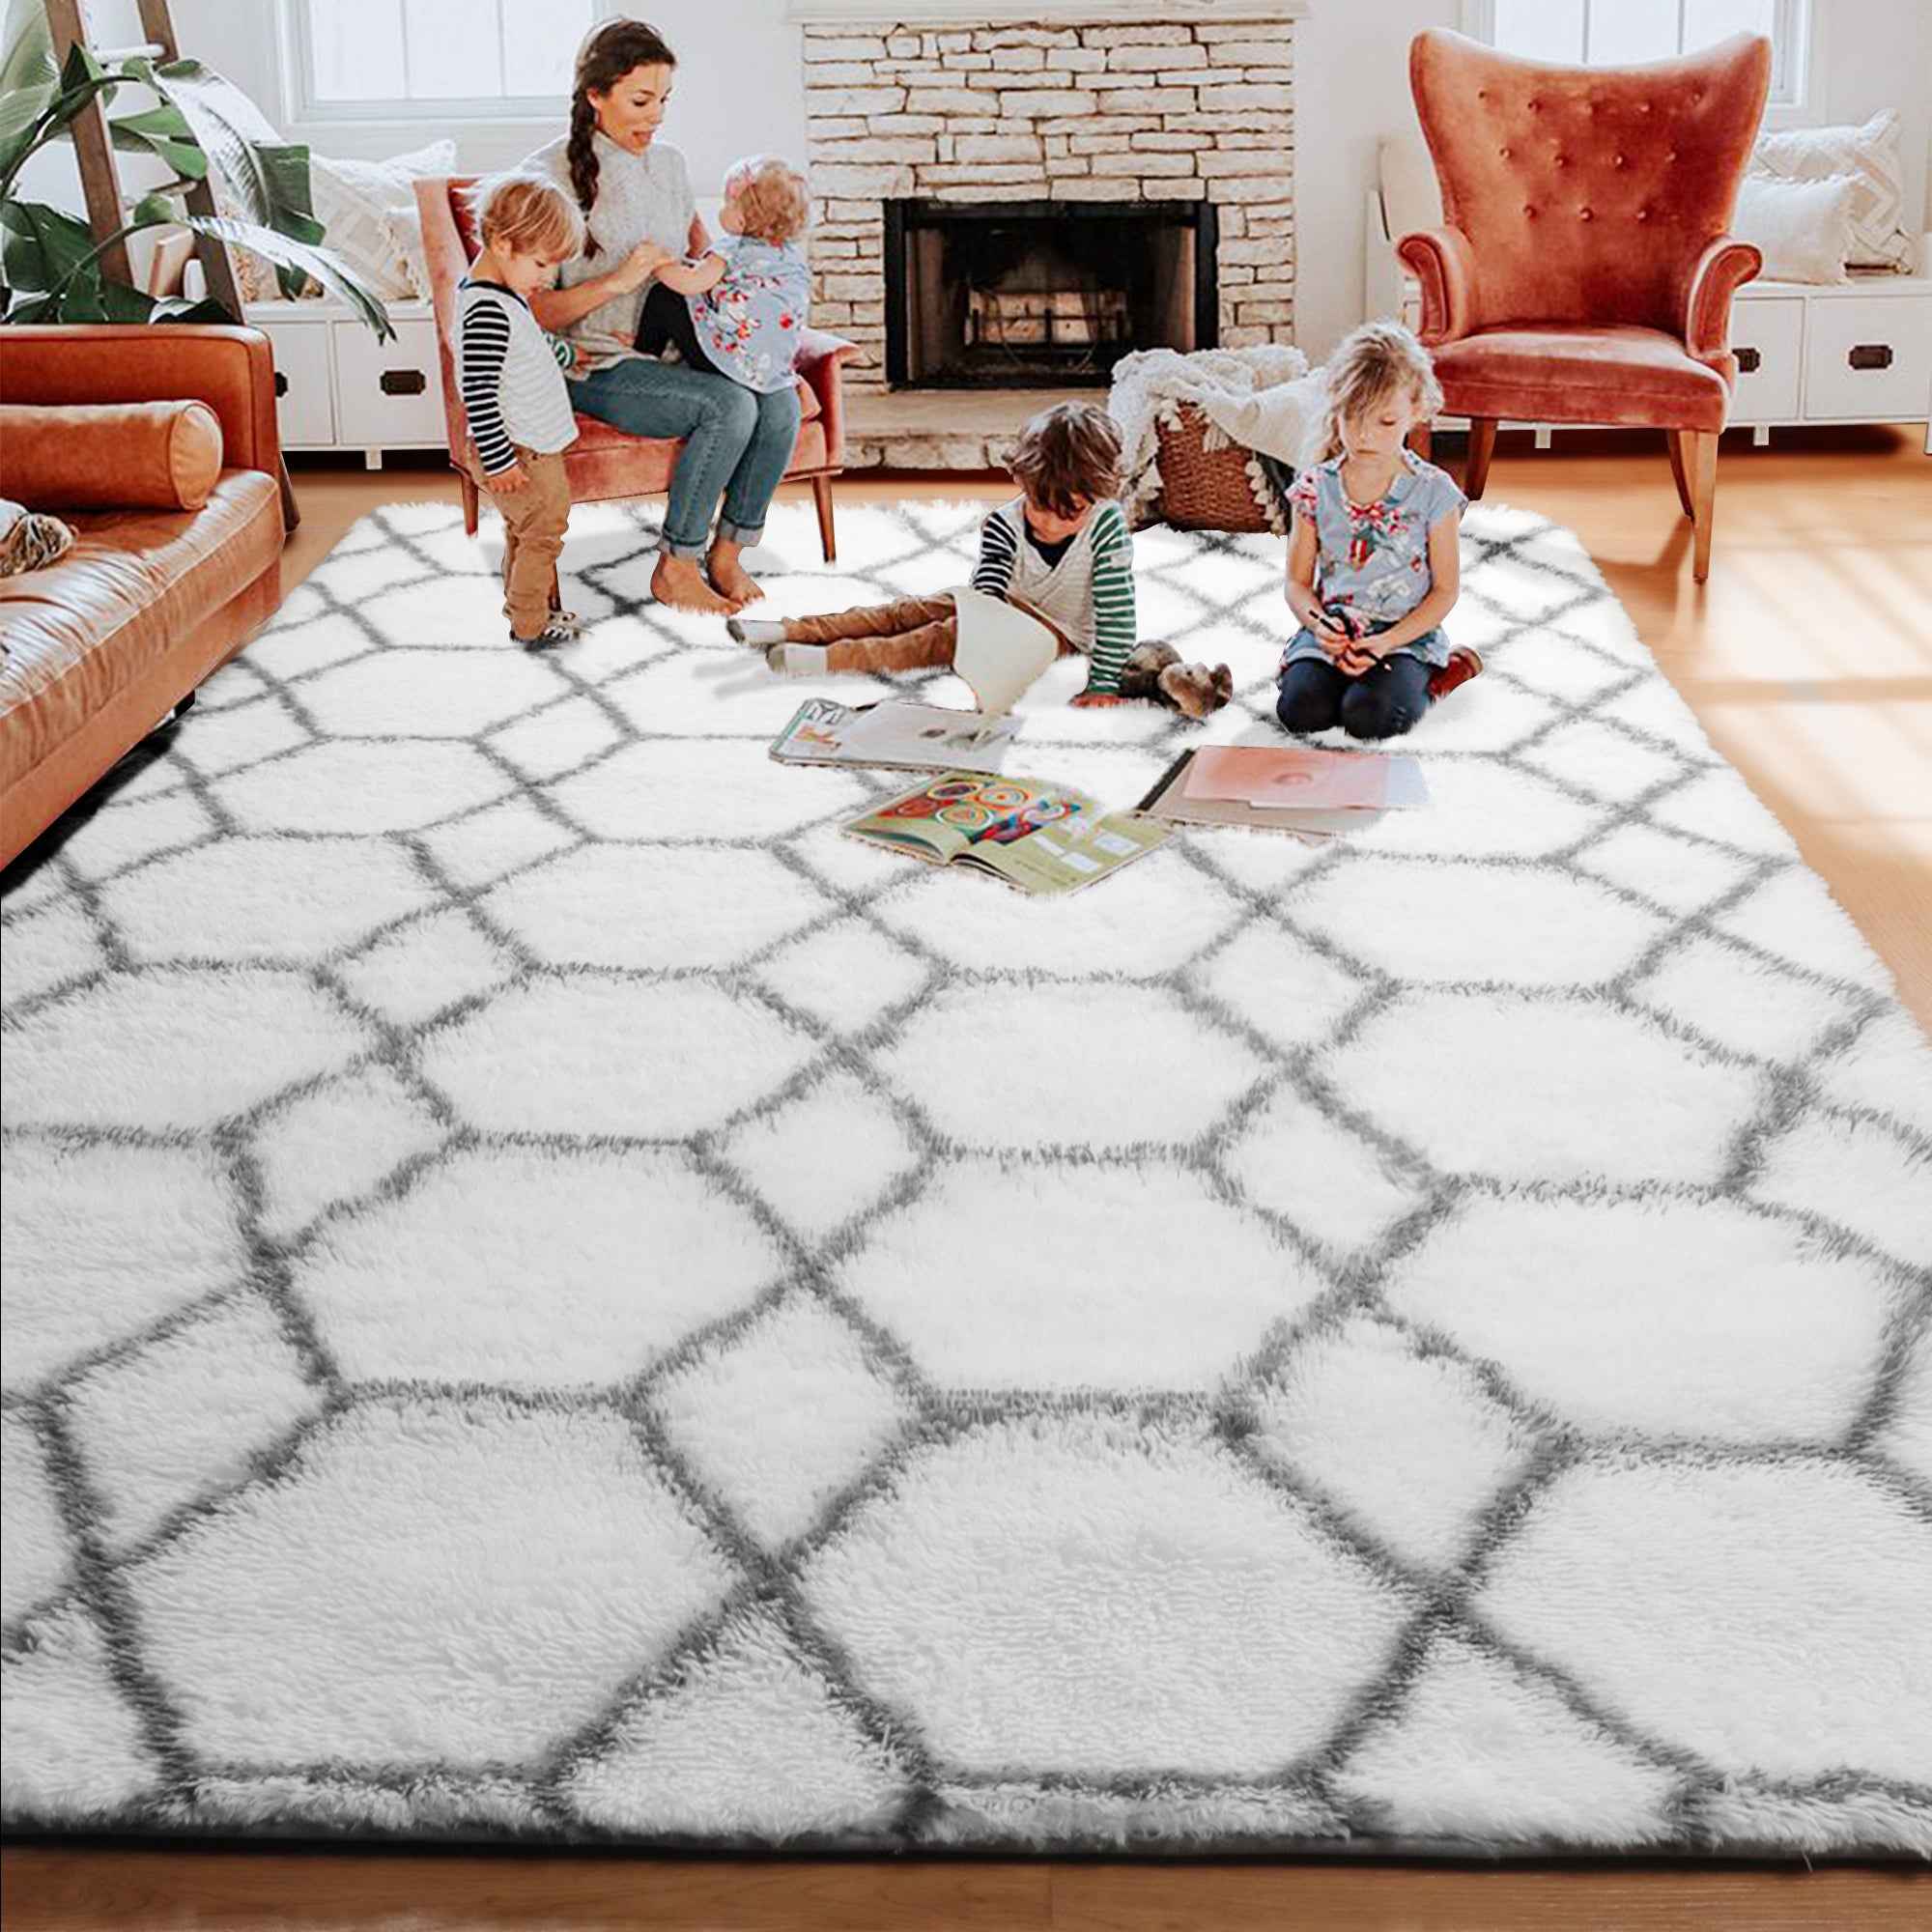 Extra Soft Fuzzy Rug Geometric Area Rug for Bedroom Living Room, White and Grey Rug